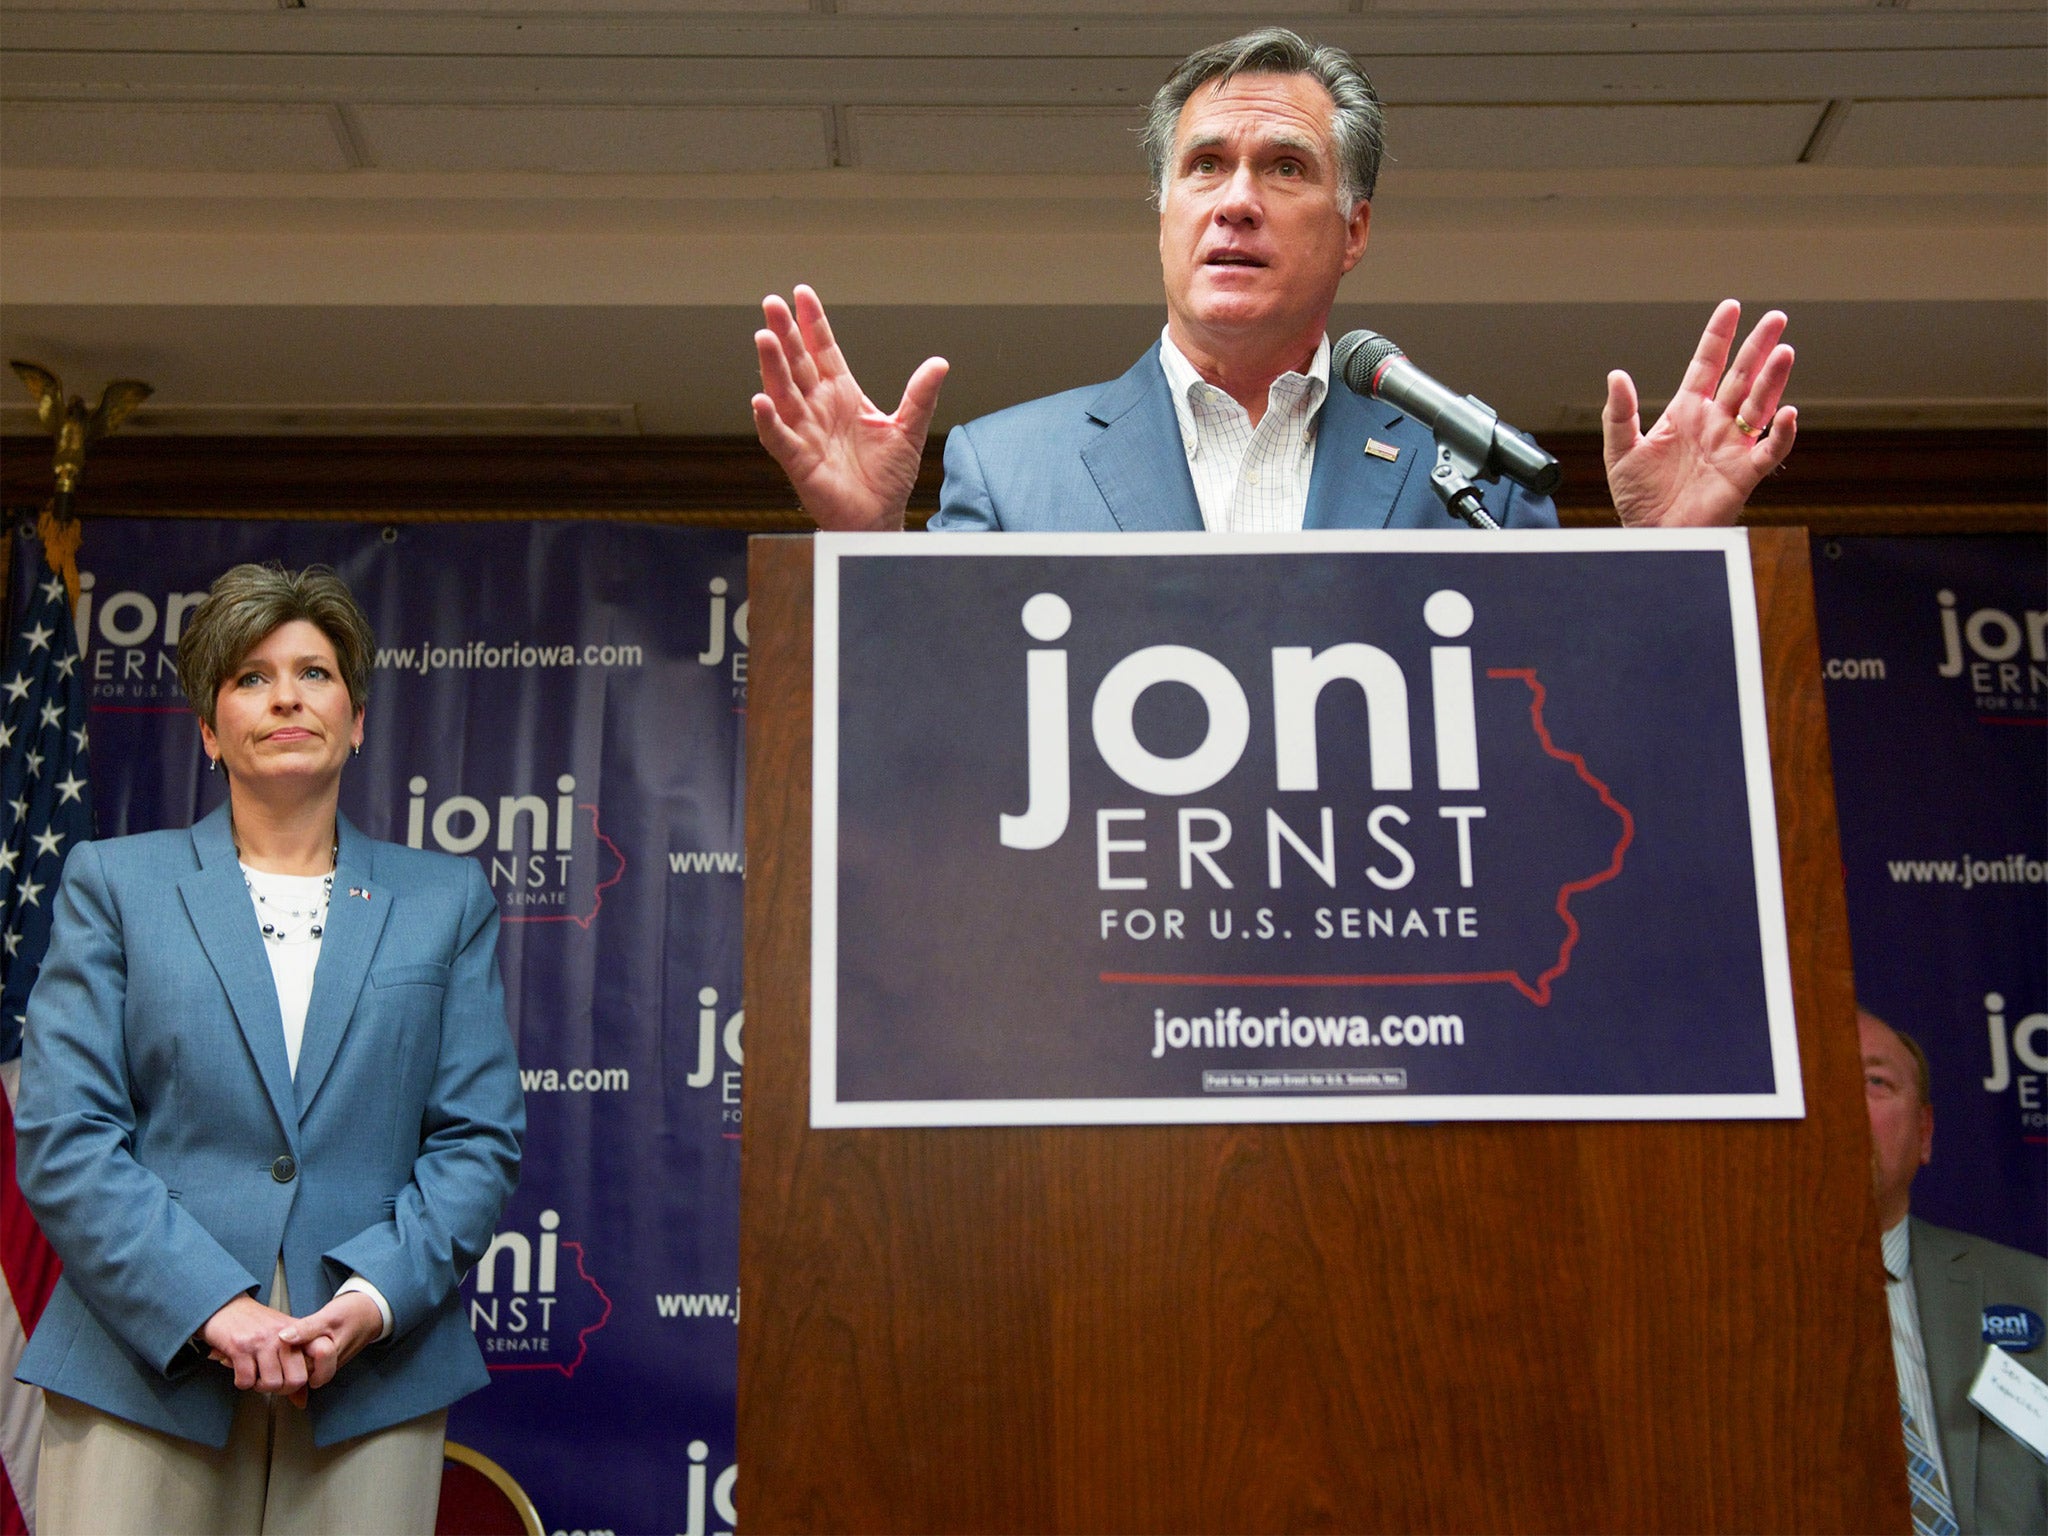 Mitt Romney has been busy with the Republican campaign for midterm elections, including at a rally in Iowa for Senate candidate Joni Ernst on Monday